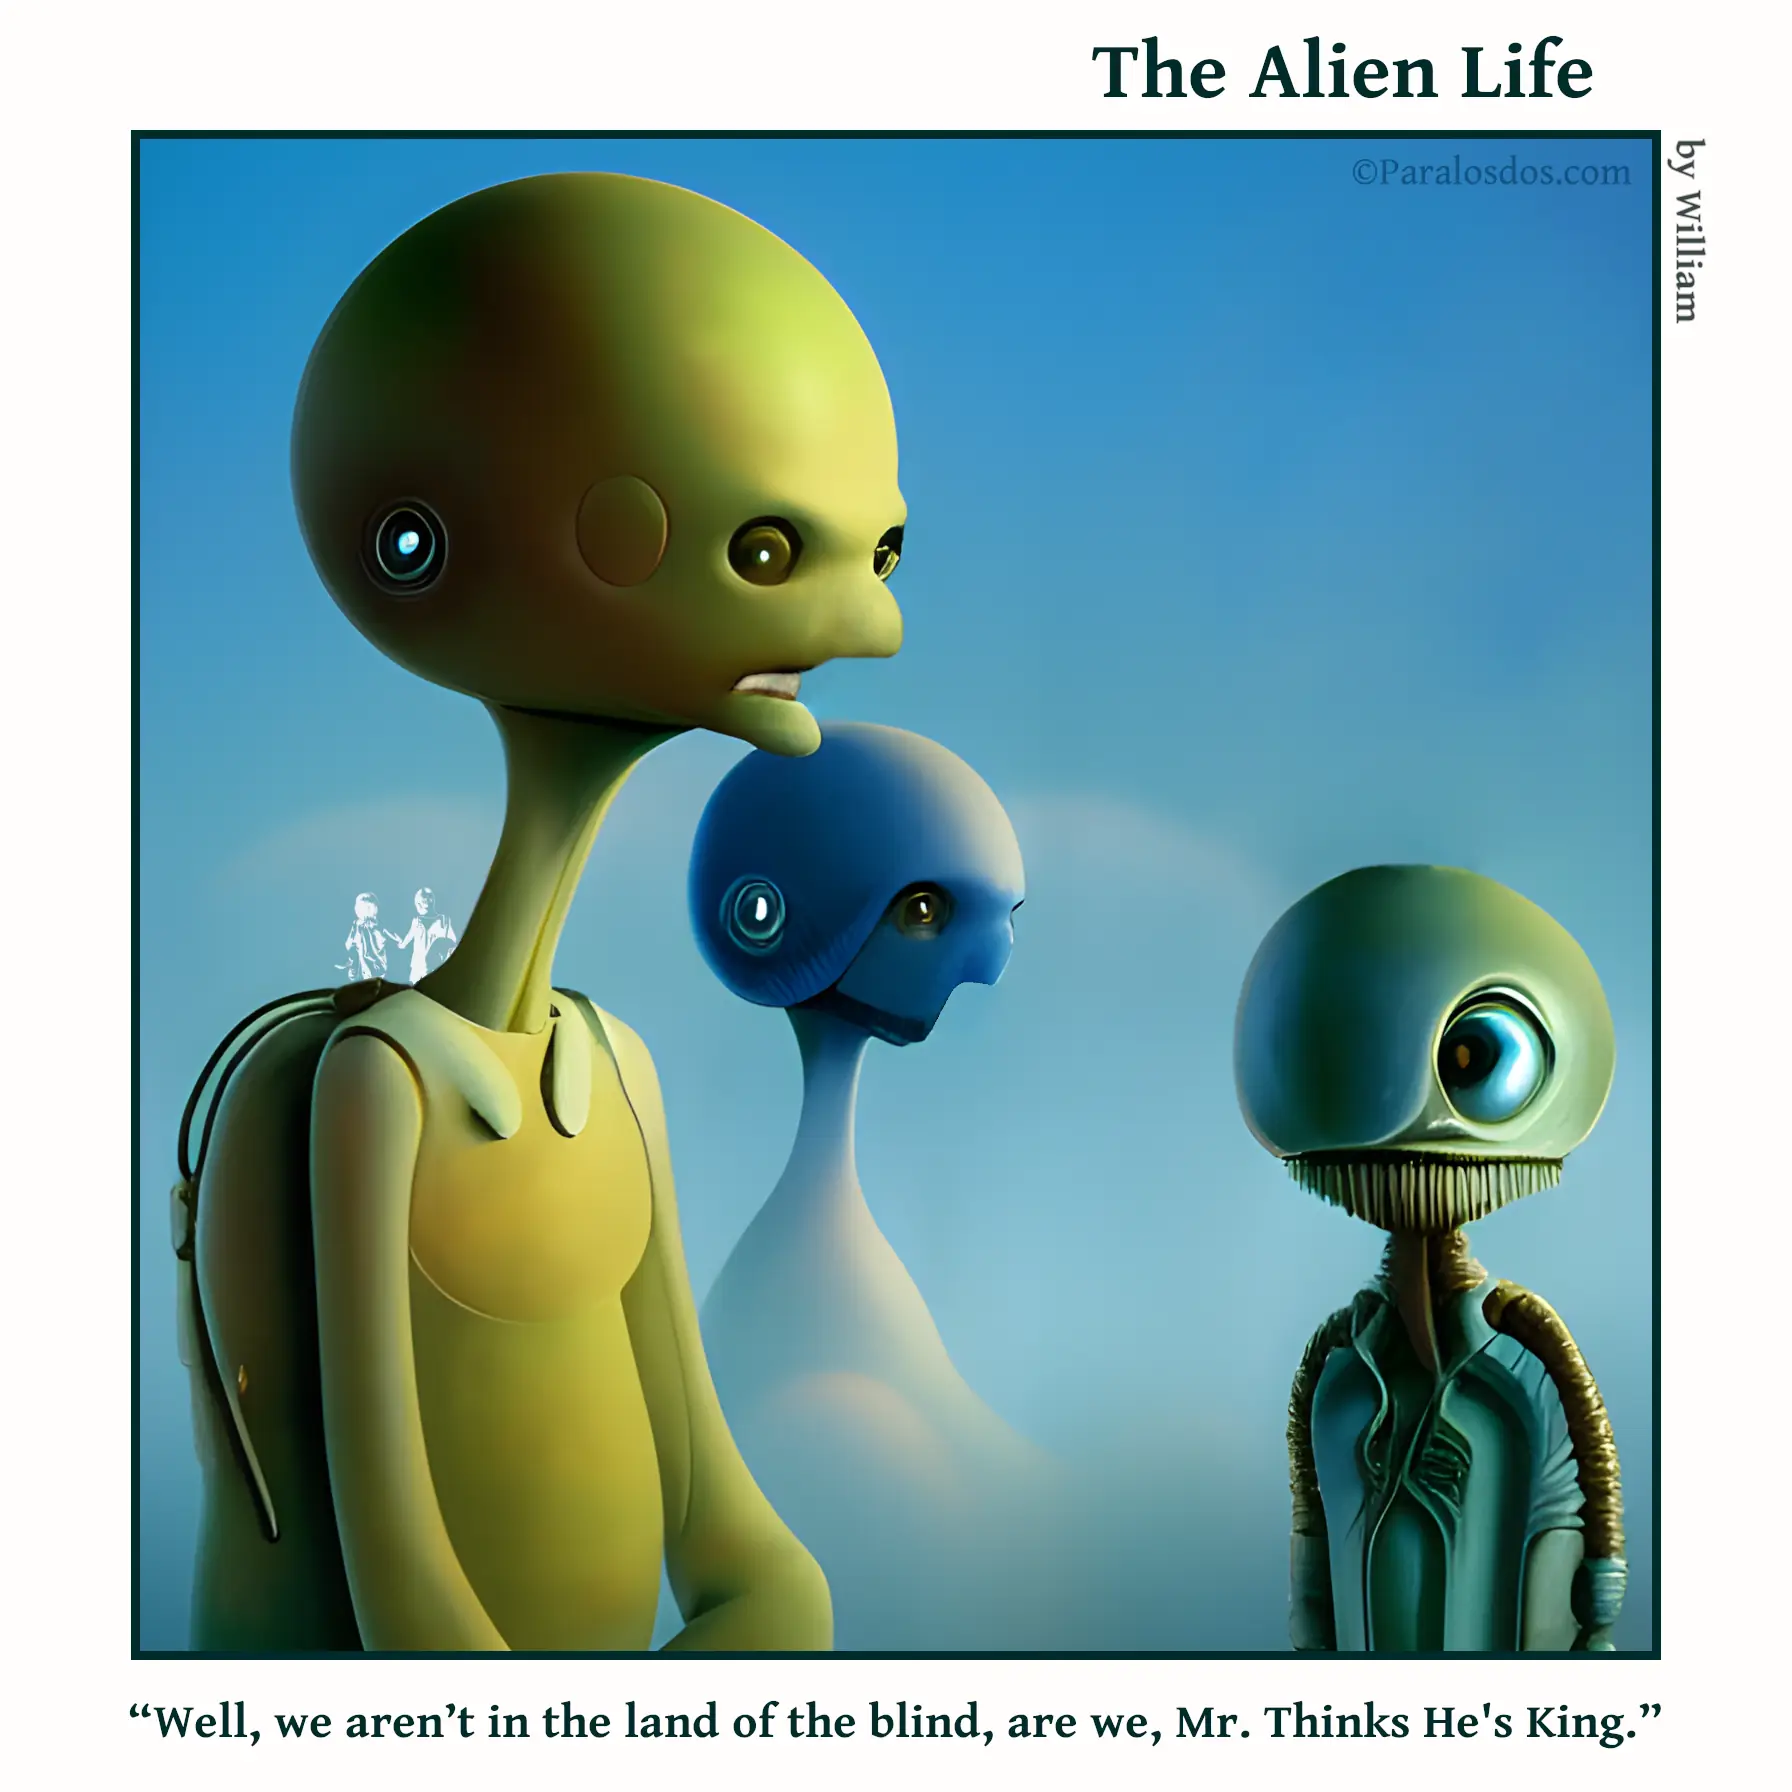 The Alien Life, one panel Comic. Two aliens are standing to the left of a third alien. The third alien has one eye. The caption reads: “Well, we aren’t in the land of the blind, are we, Mr. Thinks He's King.”